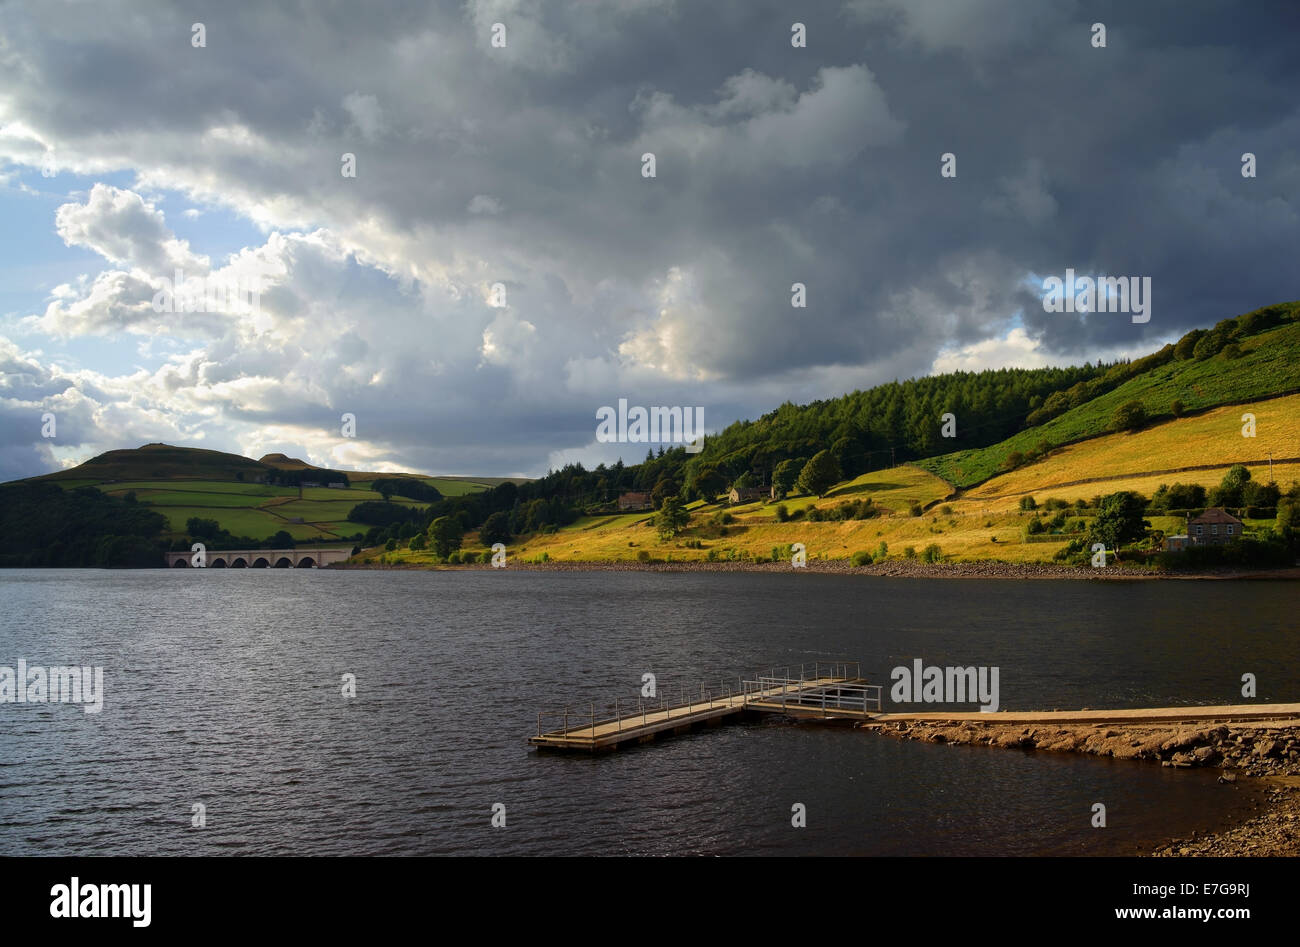 UK,Derbyshire,Peak District,Ladybower Reservoir and Boat Jetty looking towards Ashopton Viaduct & Crook Hill Stock Photo